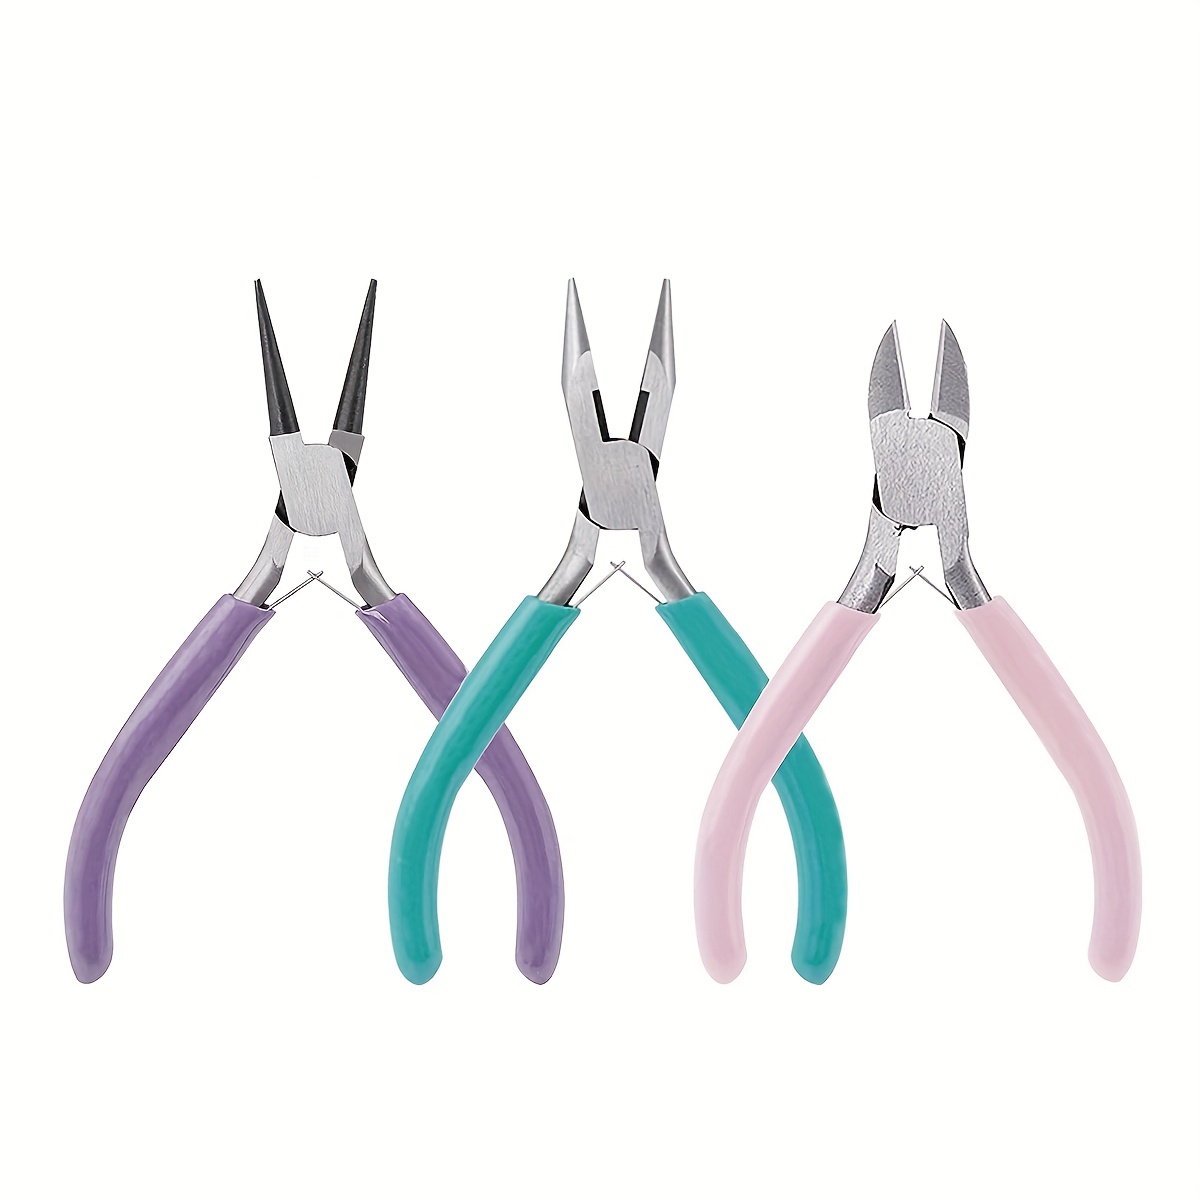 Jewelry Pliers, Jewelry Making Pliers Tools with Needle Nose Pliers/Chain Nose  Pliers, Round Nose Pliers and Wire Cutter for Jewelry Repair, Wire  Wrapping, Crafts, Jewelry Making Supplies3pcs 